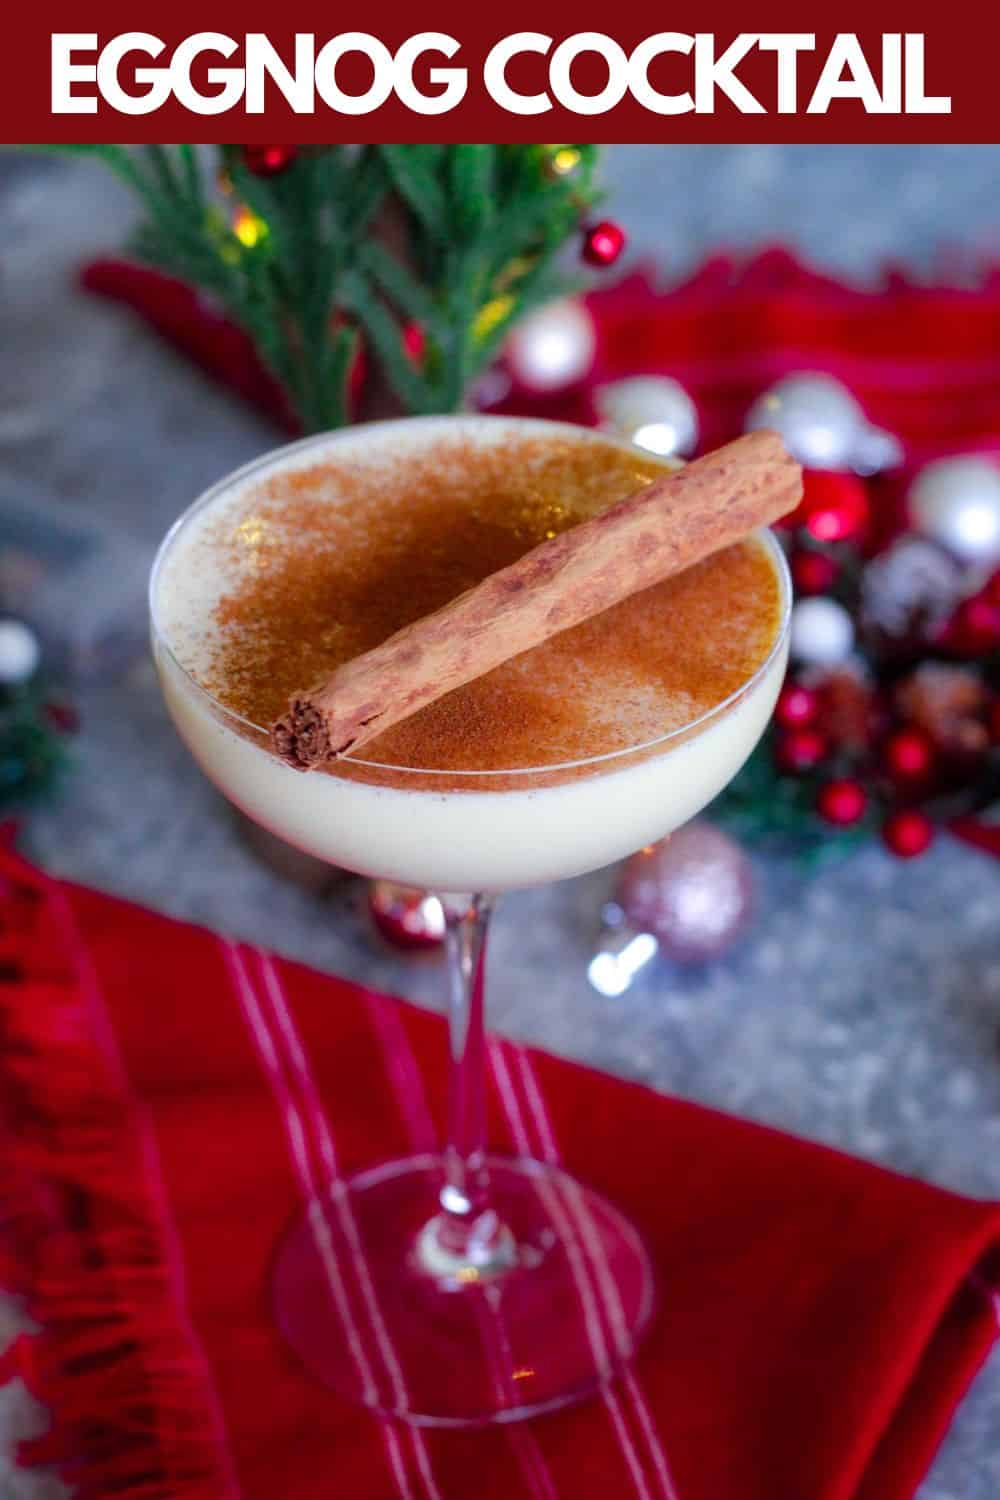 An image prepared for Pinterest, it shows an eggnog cocktail in a coupe glass in a festive. setting. There's a title bar over the image. 